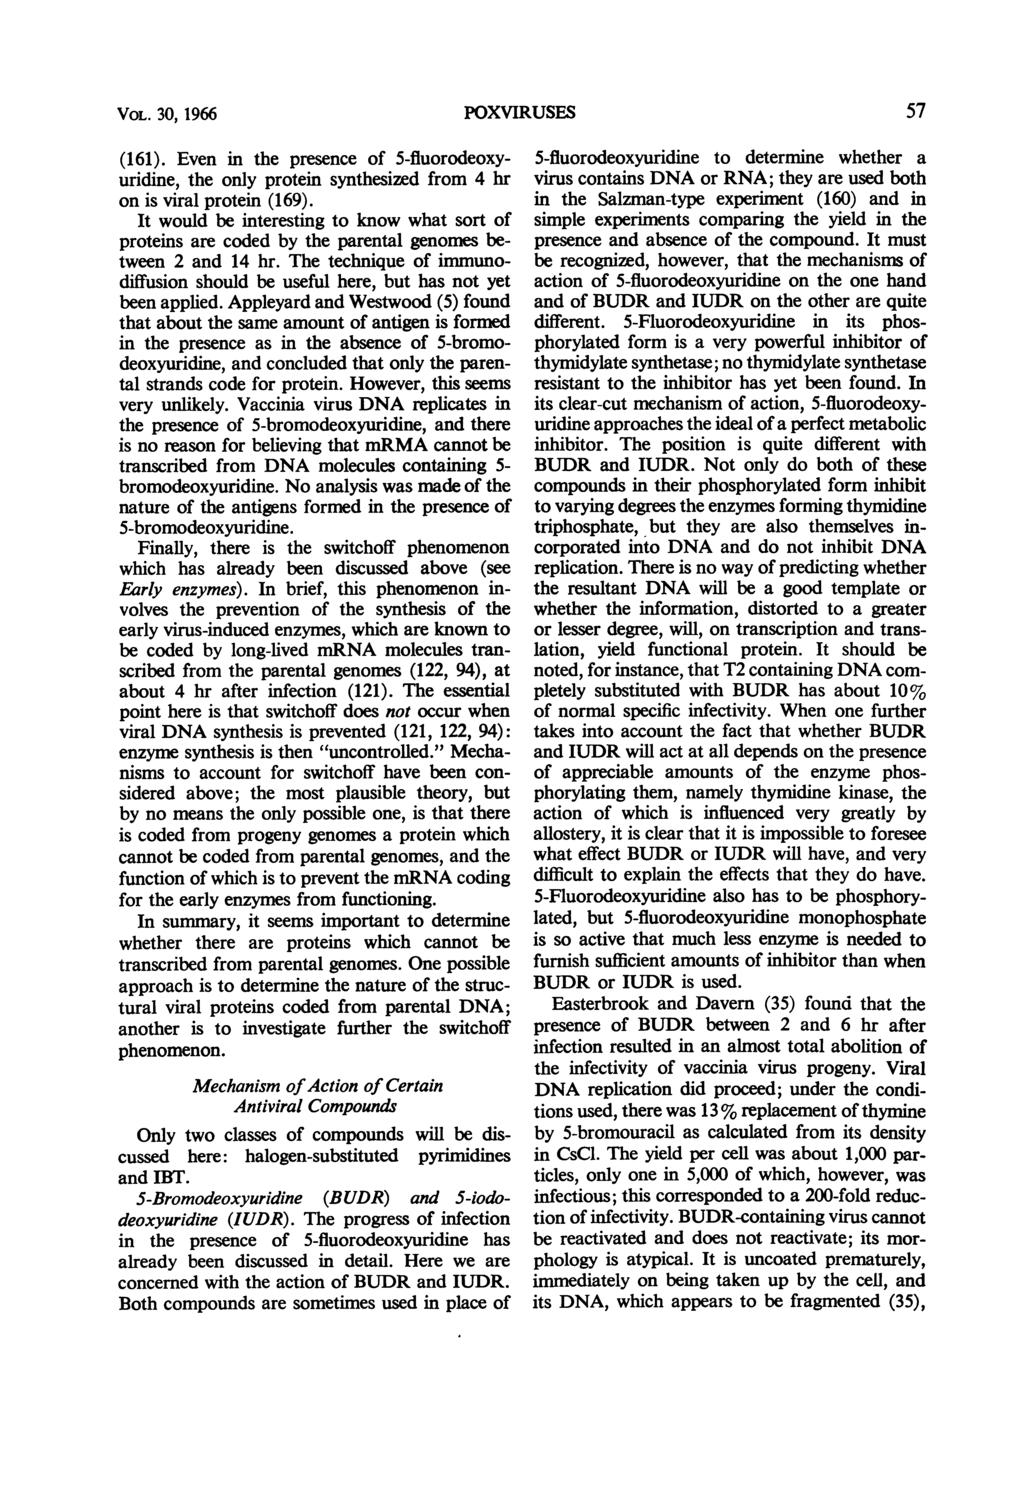 VOL. 30, 1966 POXVIRUSES (161). Even in the presence of 5-fluorodeoxyuridine, the only protein synthesized from 4 hr on is viral protein (169).